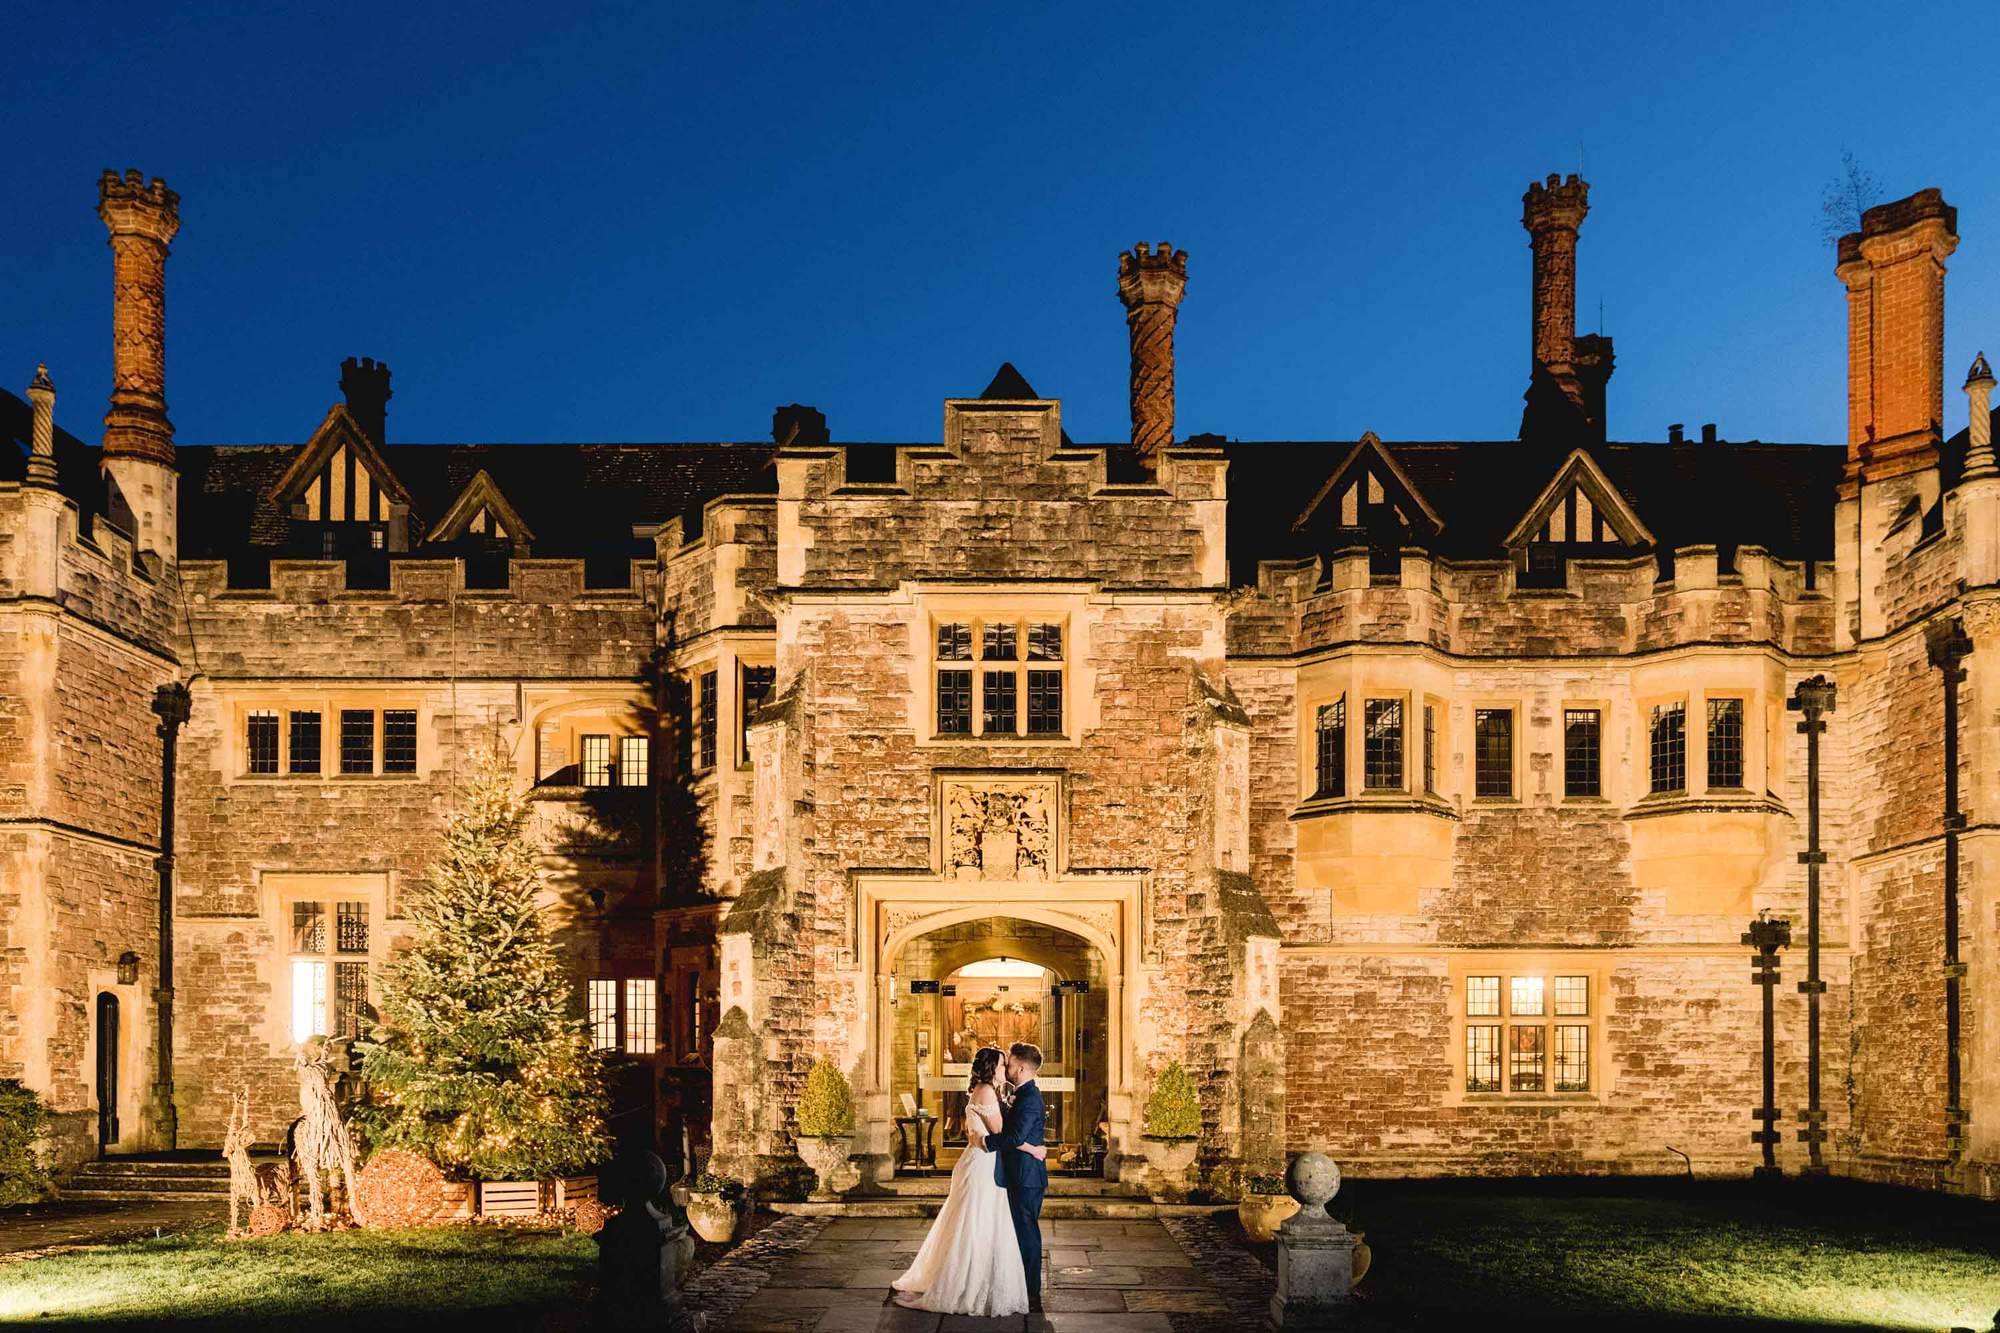 A bride and groom kiss and cuddle under the twilight sky at Rhinefield House in Hampshire.